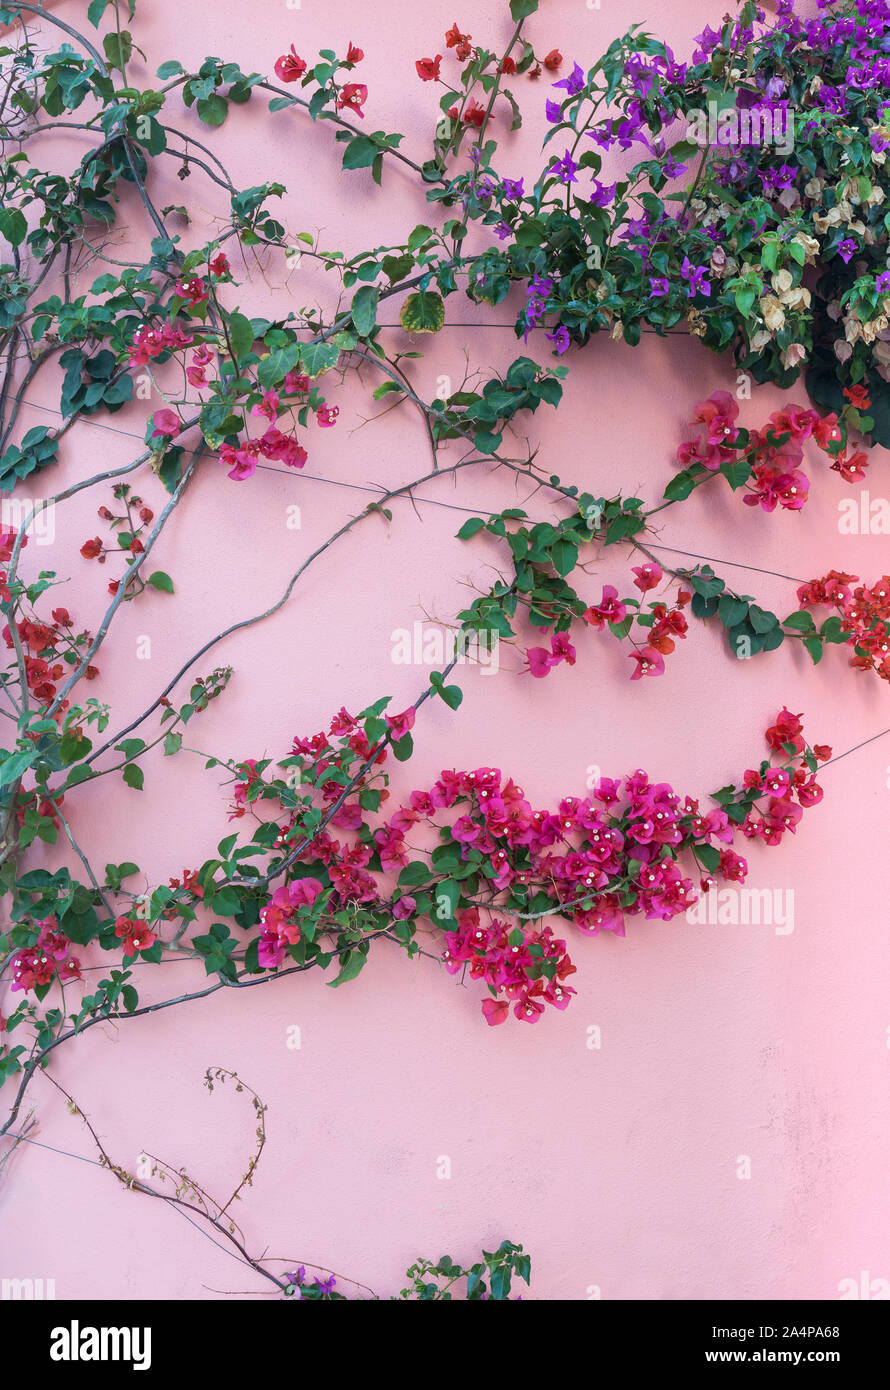 Flowering vine plant on a pink stone wall, viewed from the front. Stock Photo